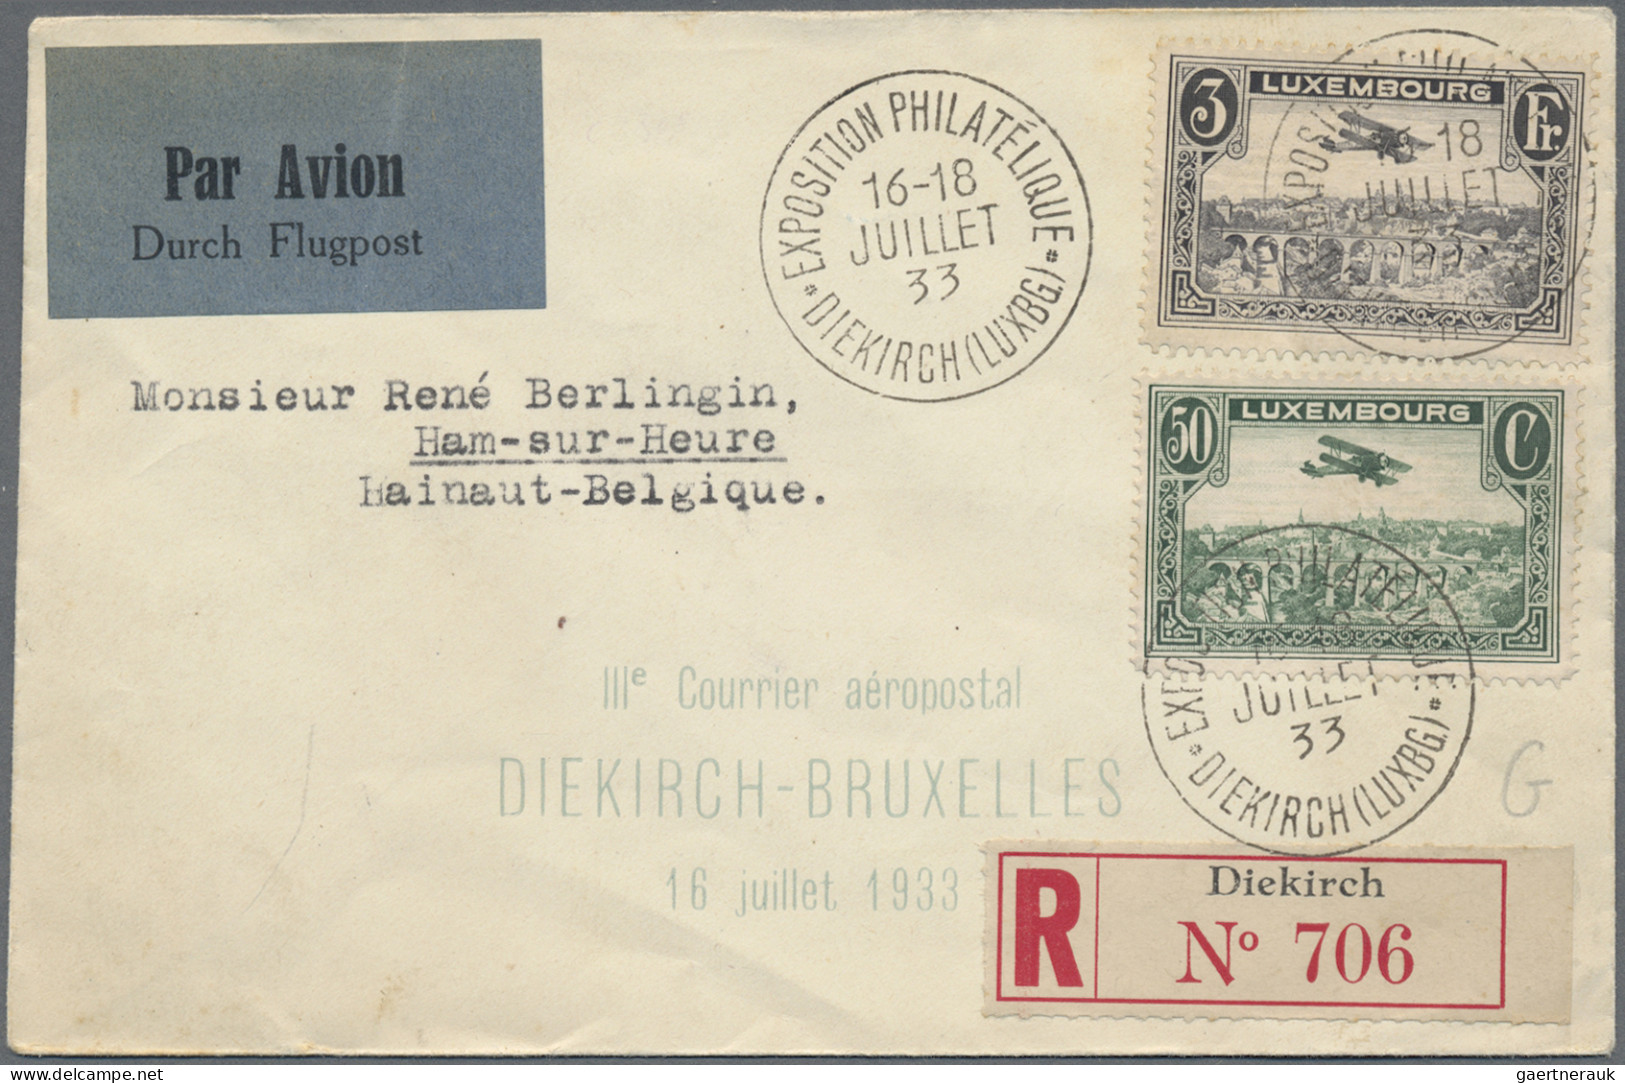 Luxembourg: 1927/2011, assortment of apprx. 160 covers/cards, 1st/special flight